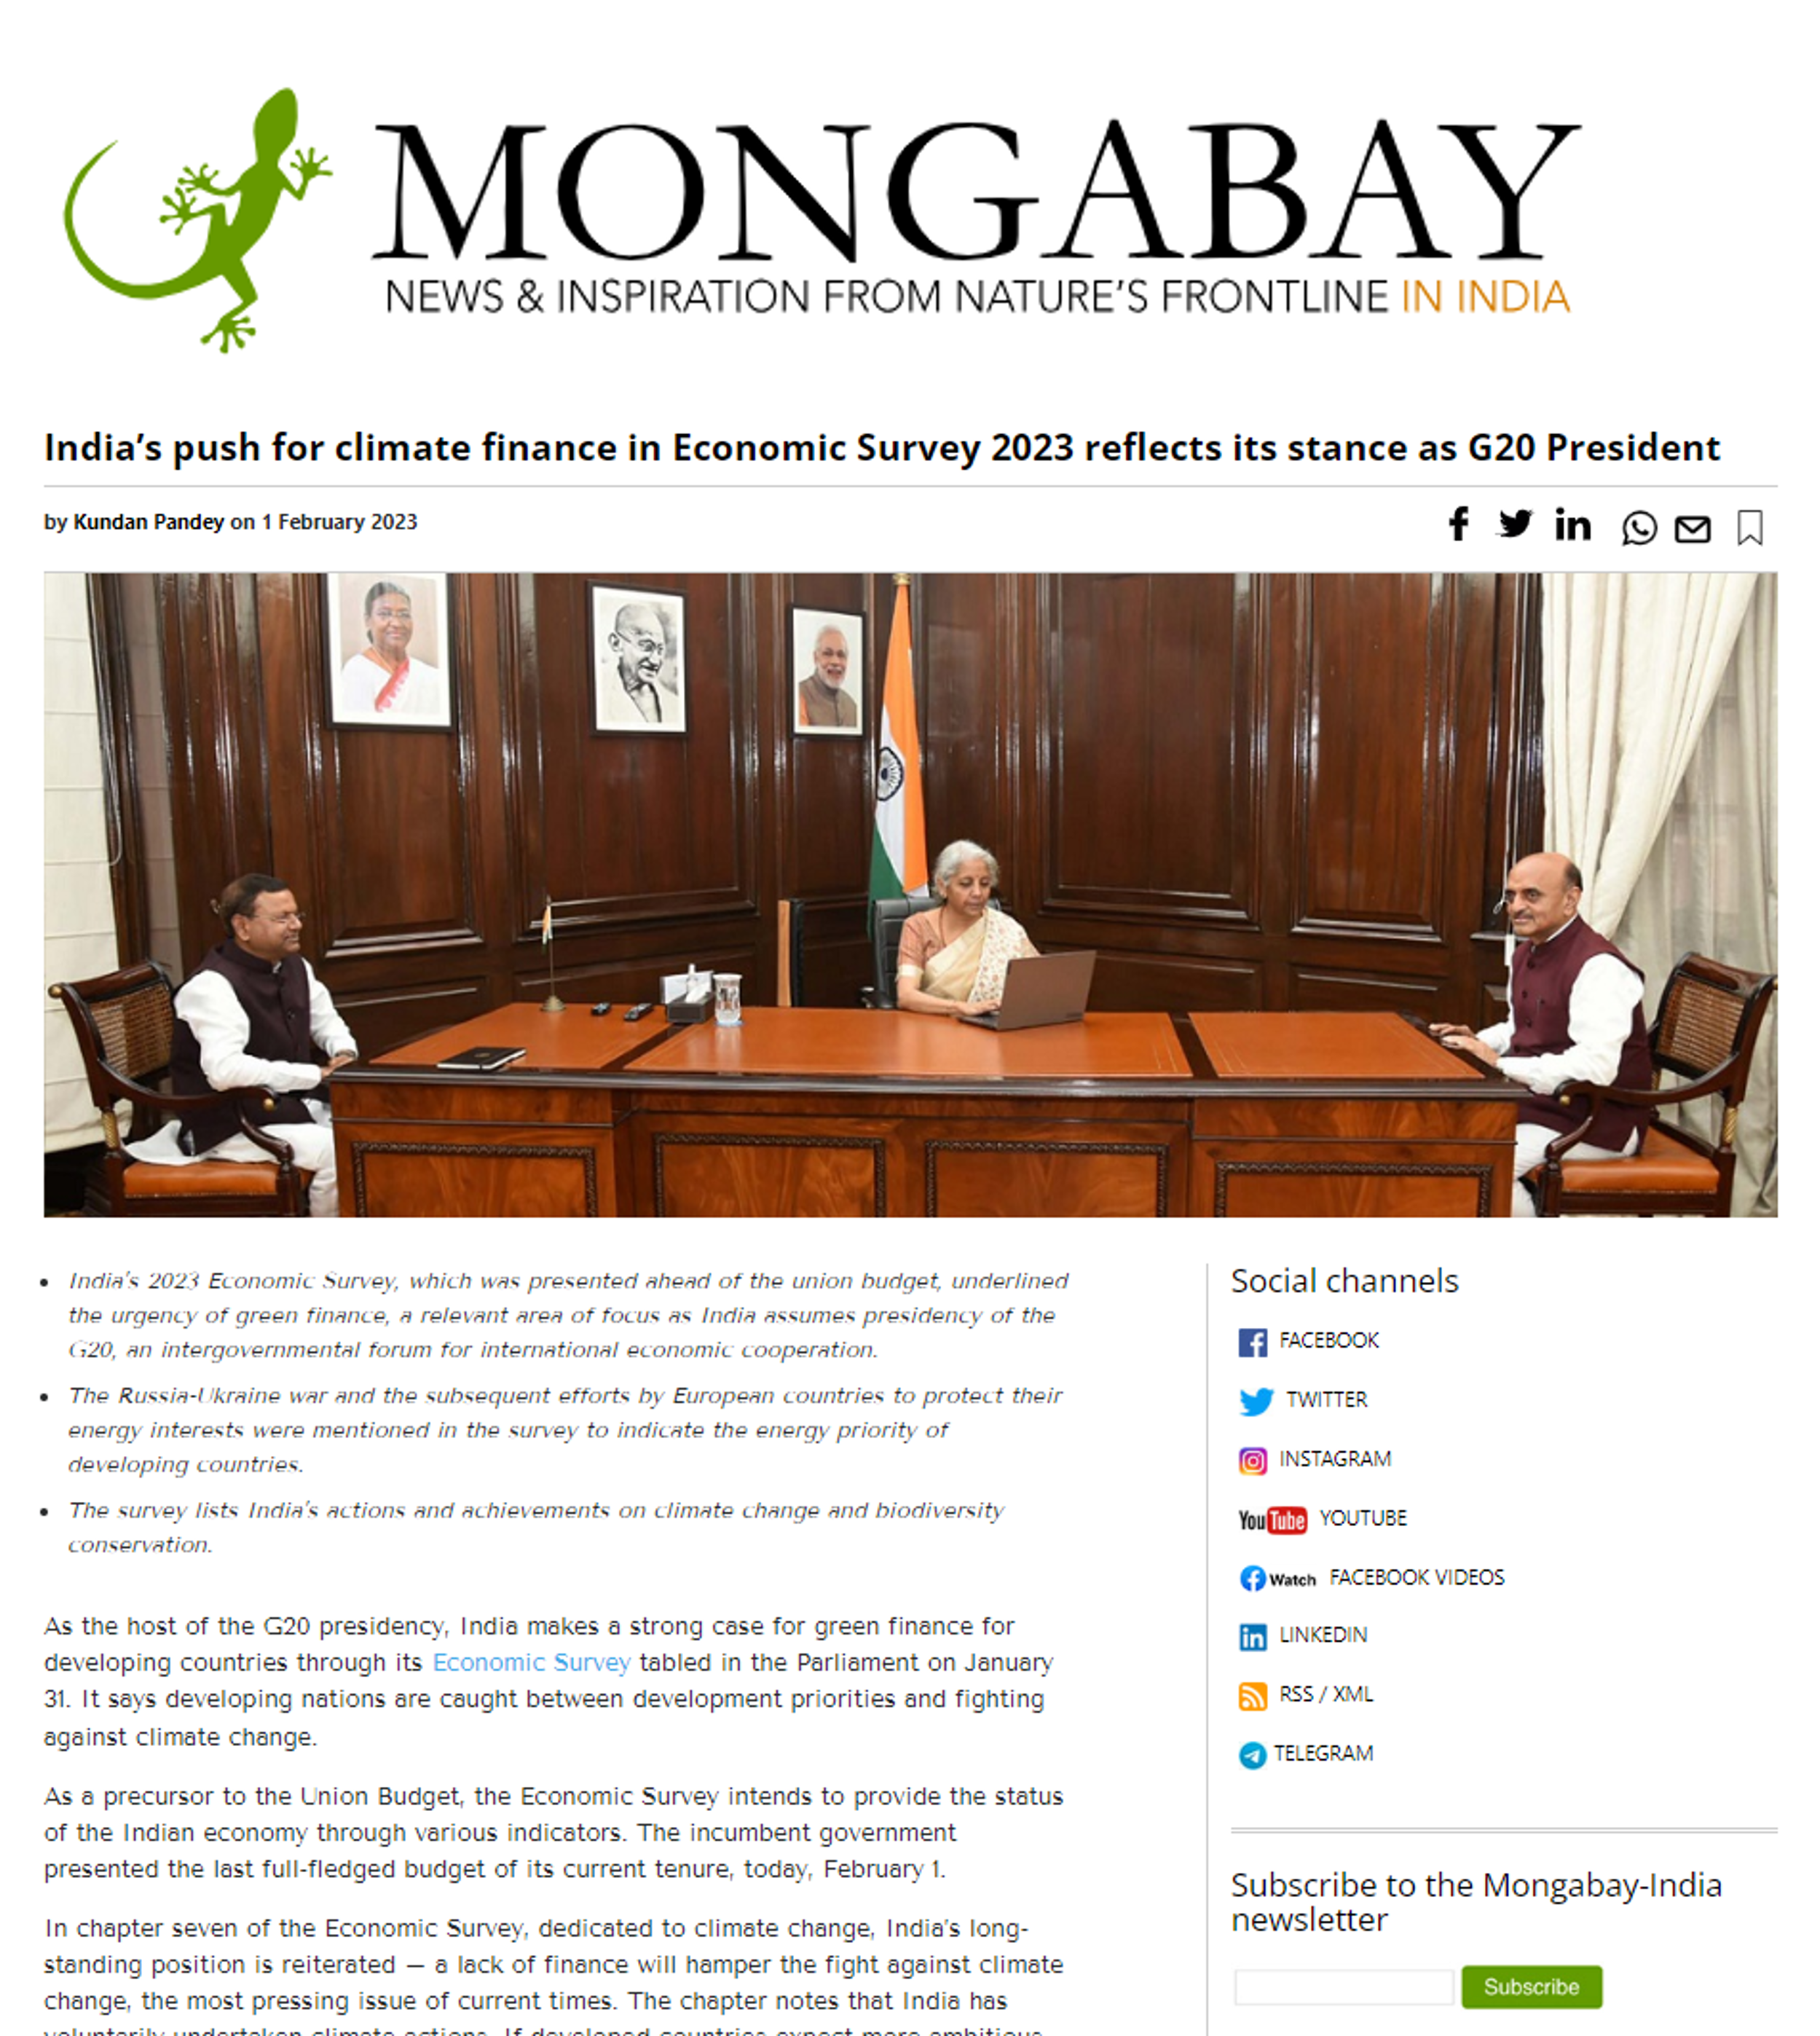 Krithika Ravishankar quoted by Mongabay India on climate finance in the context of the Russia–Ukraine war